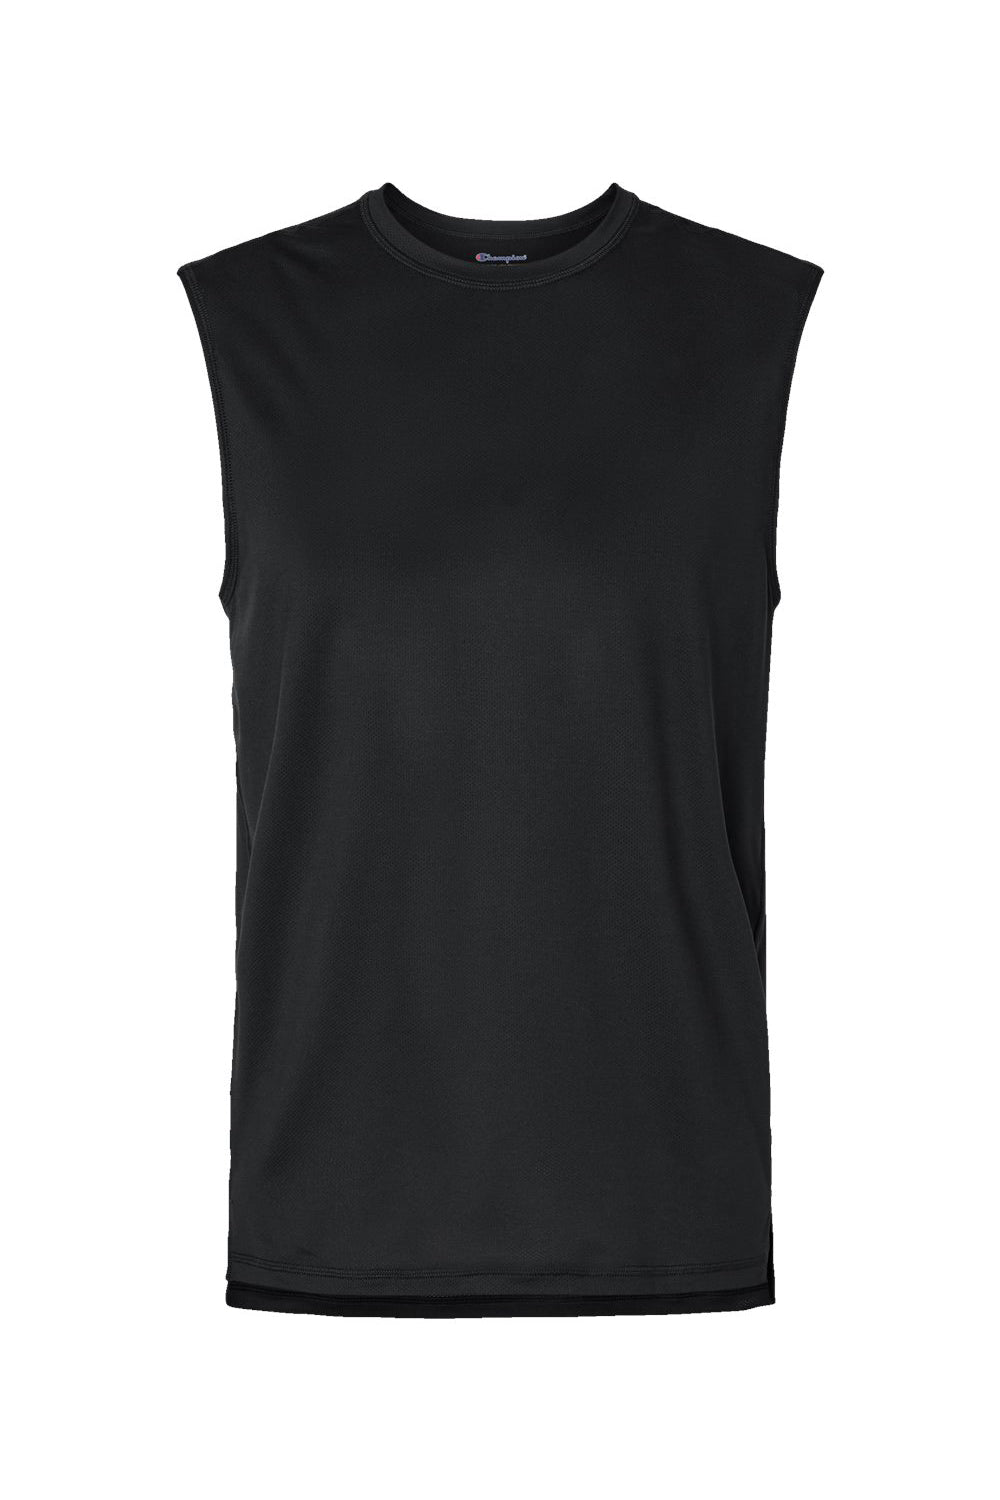 Champion CHP170 Mens Sport Muscle Tank Top Black Flat Front